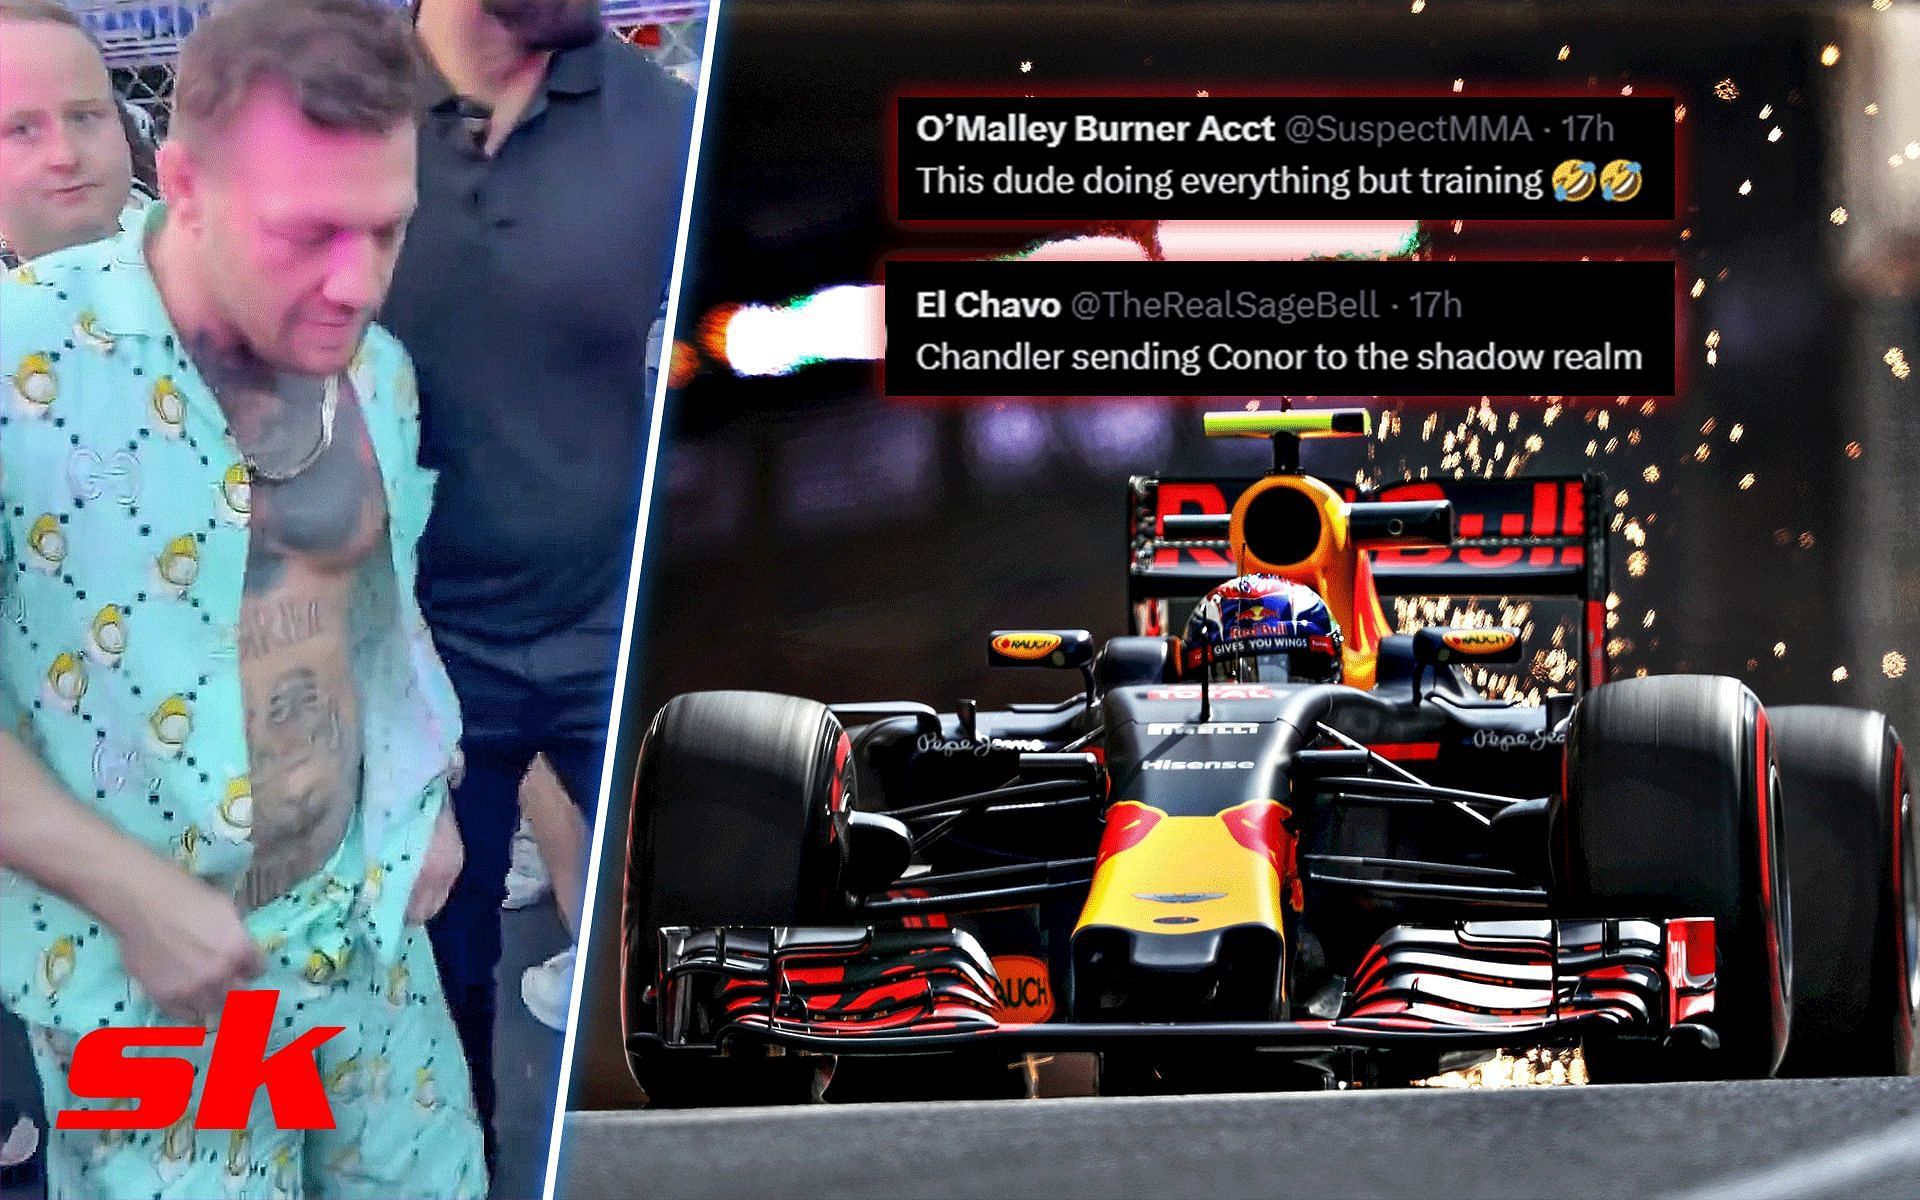 Conor McGregor at the Formula 1 Monaco GP. [Images courtesy: left image from Twitter @mma_orbit and right image from Getty Images]